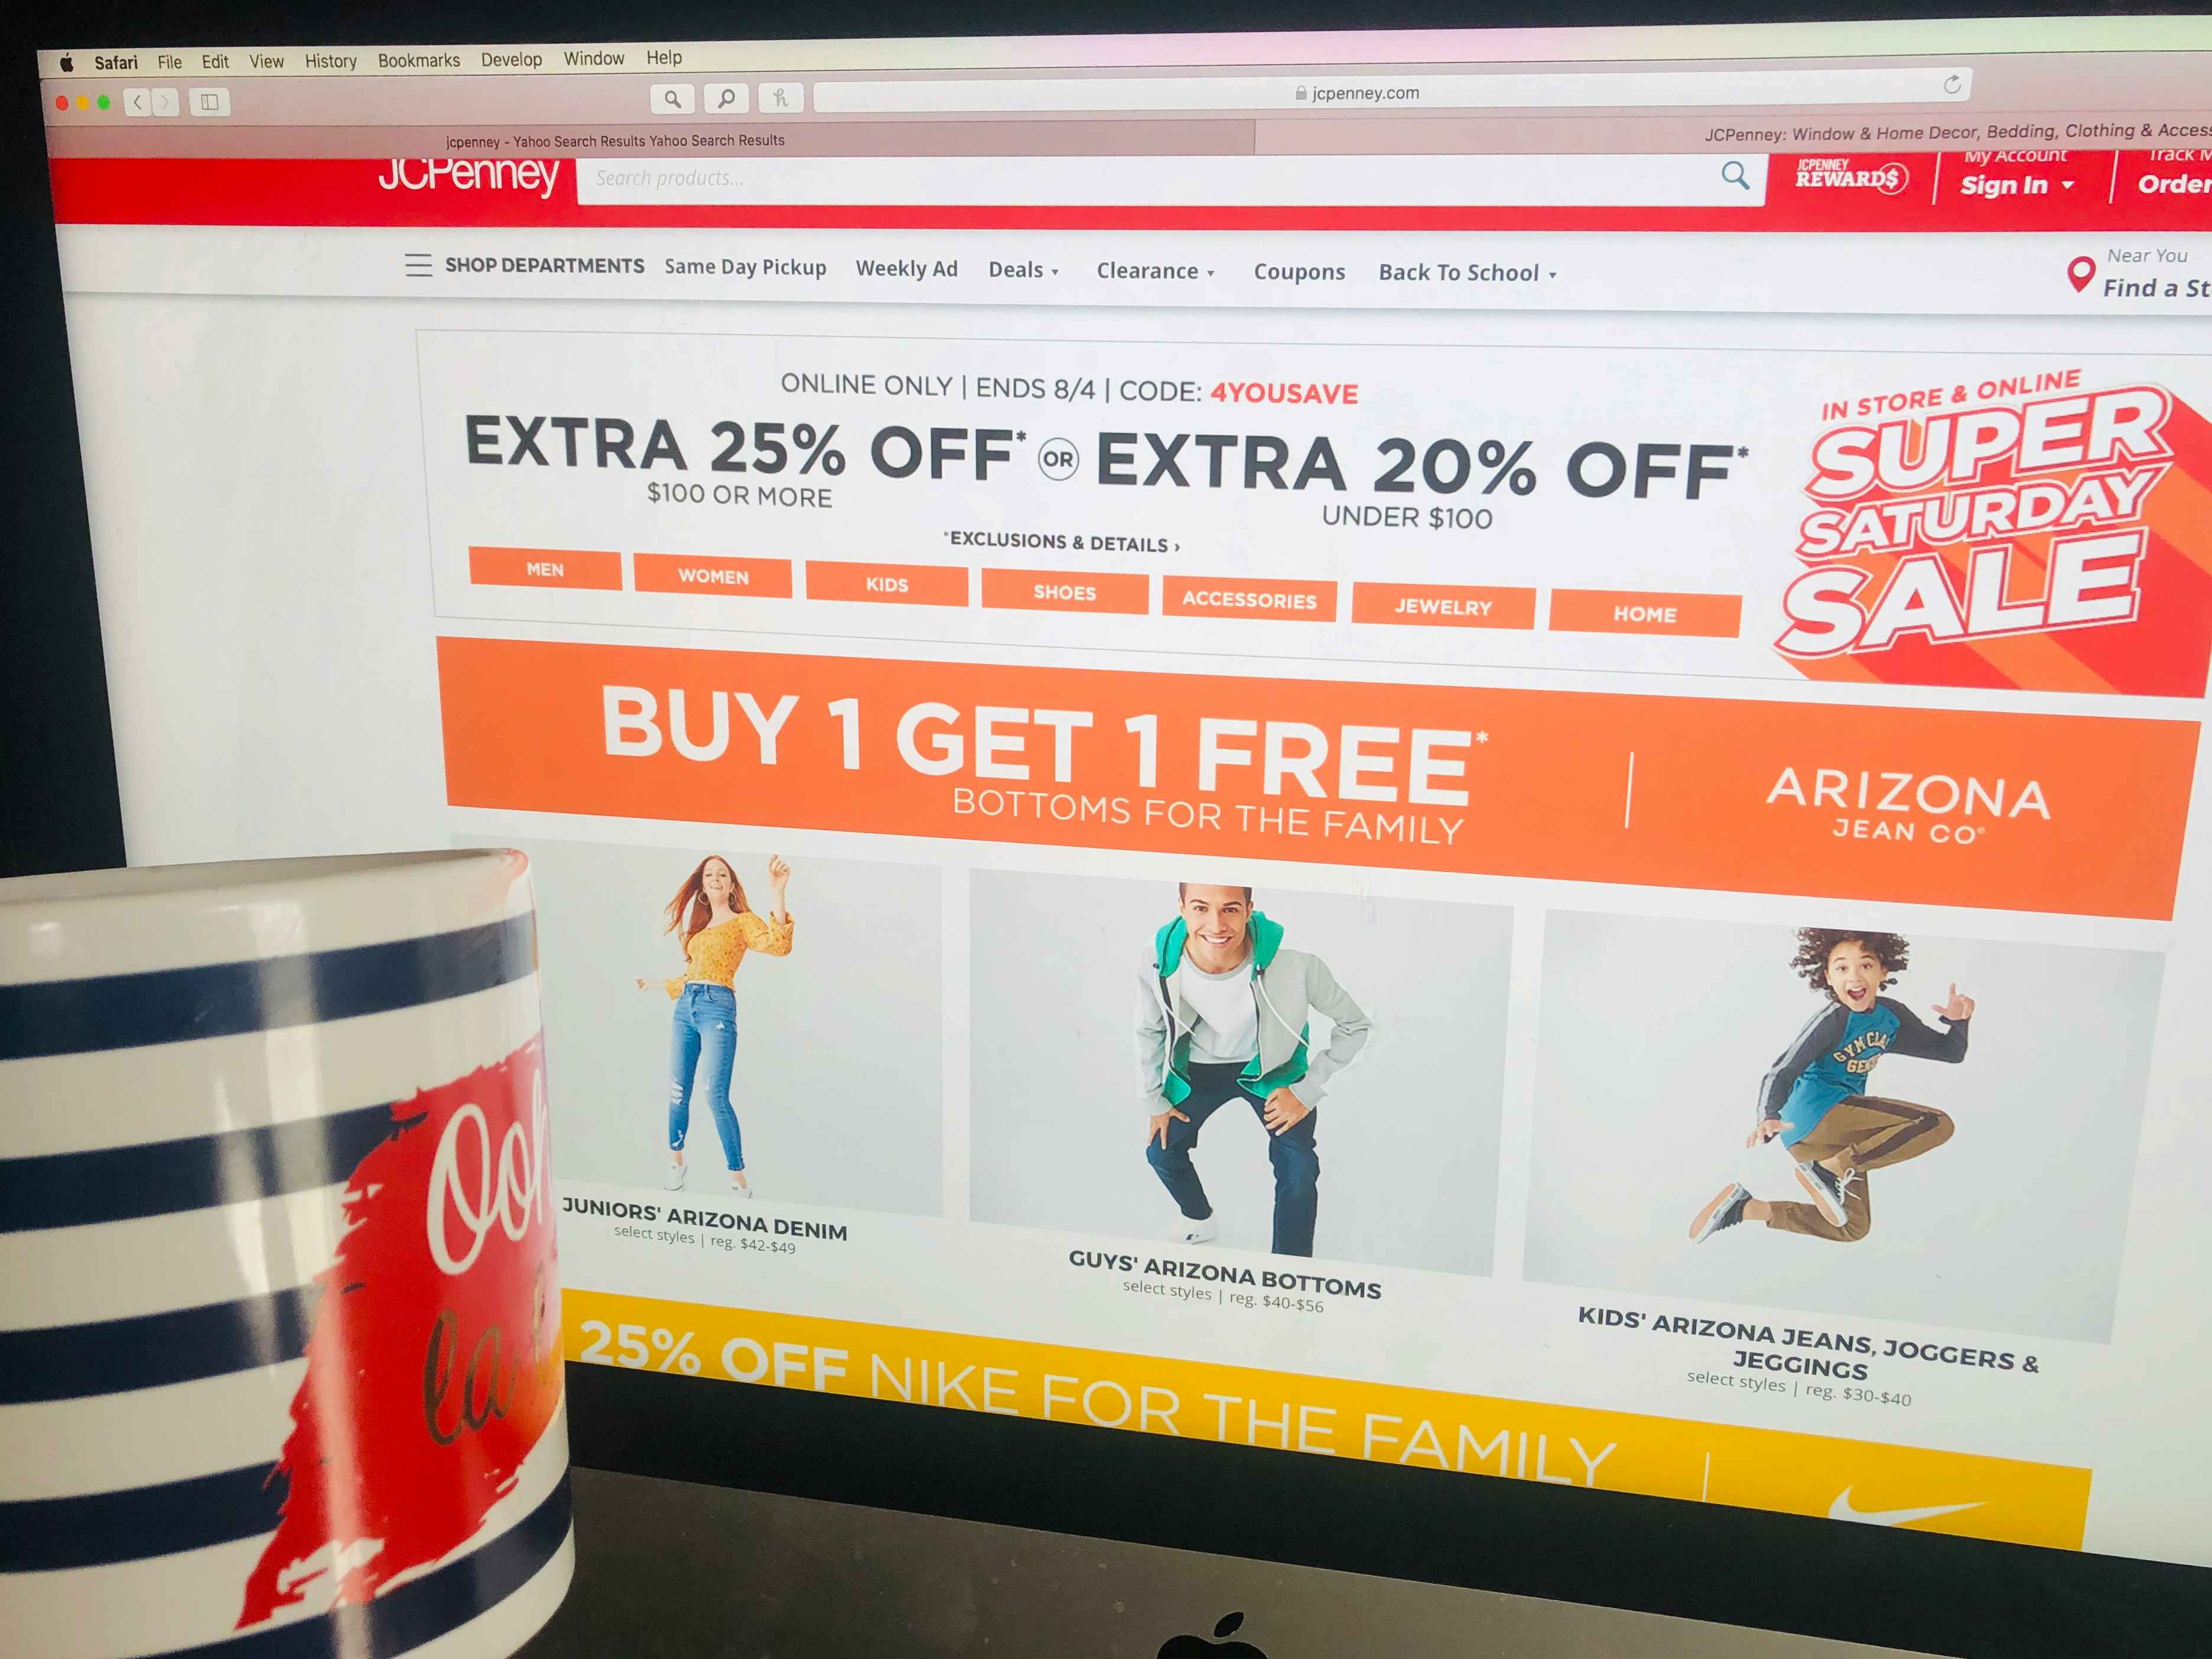 JCPenney: No Coupons or Sales, But Plenty of Gimmicks - Coupons in